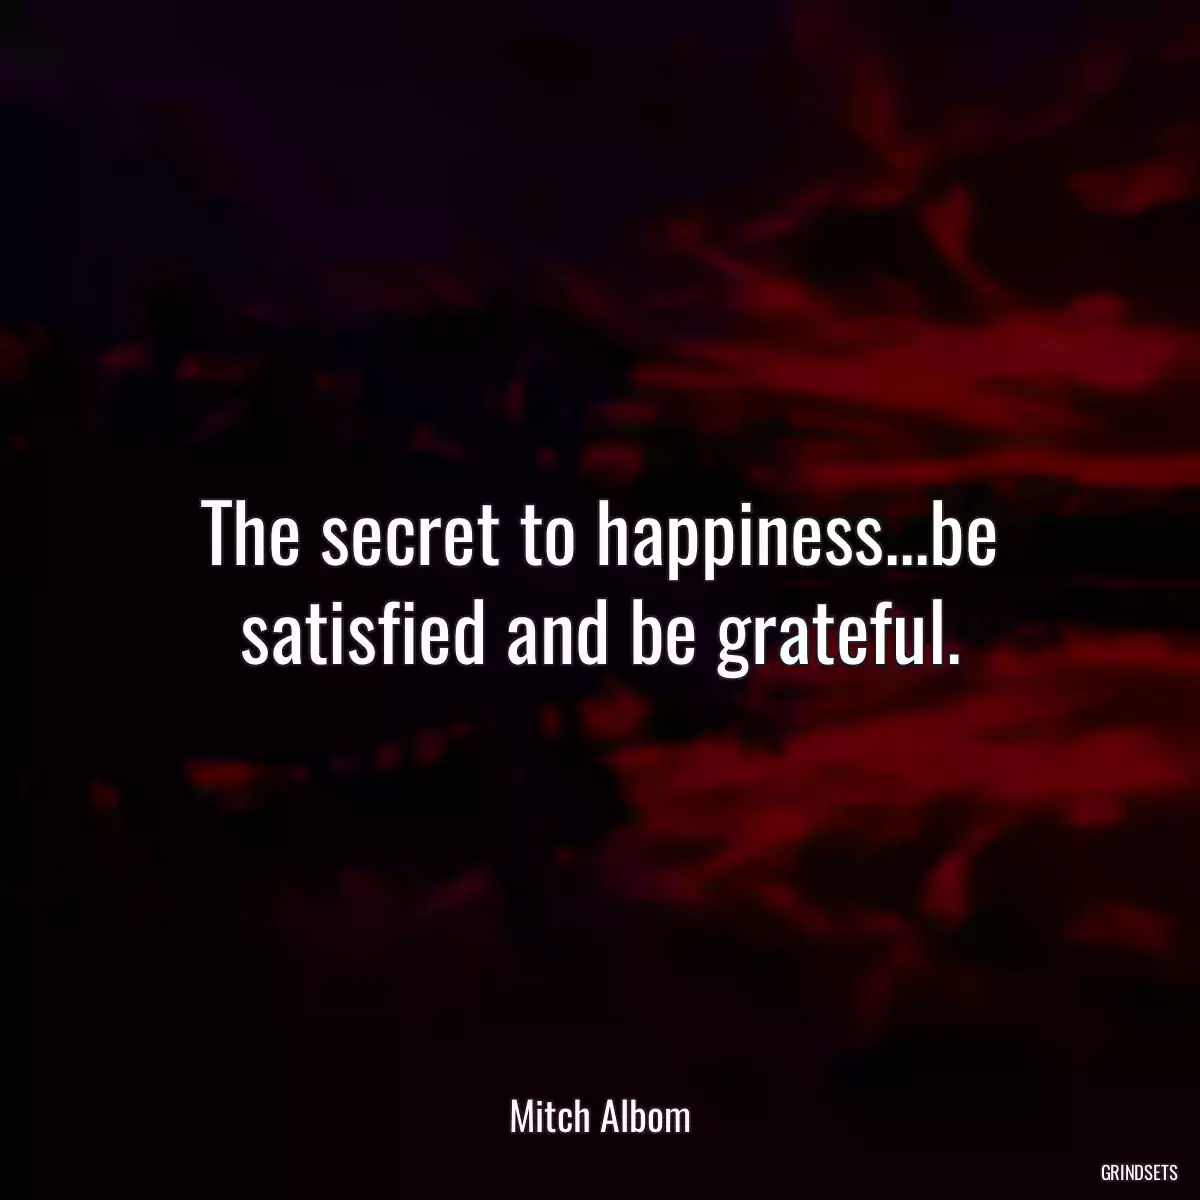 The secret to happiness...be satisfied and be grateful.